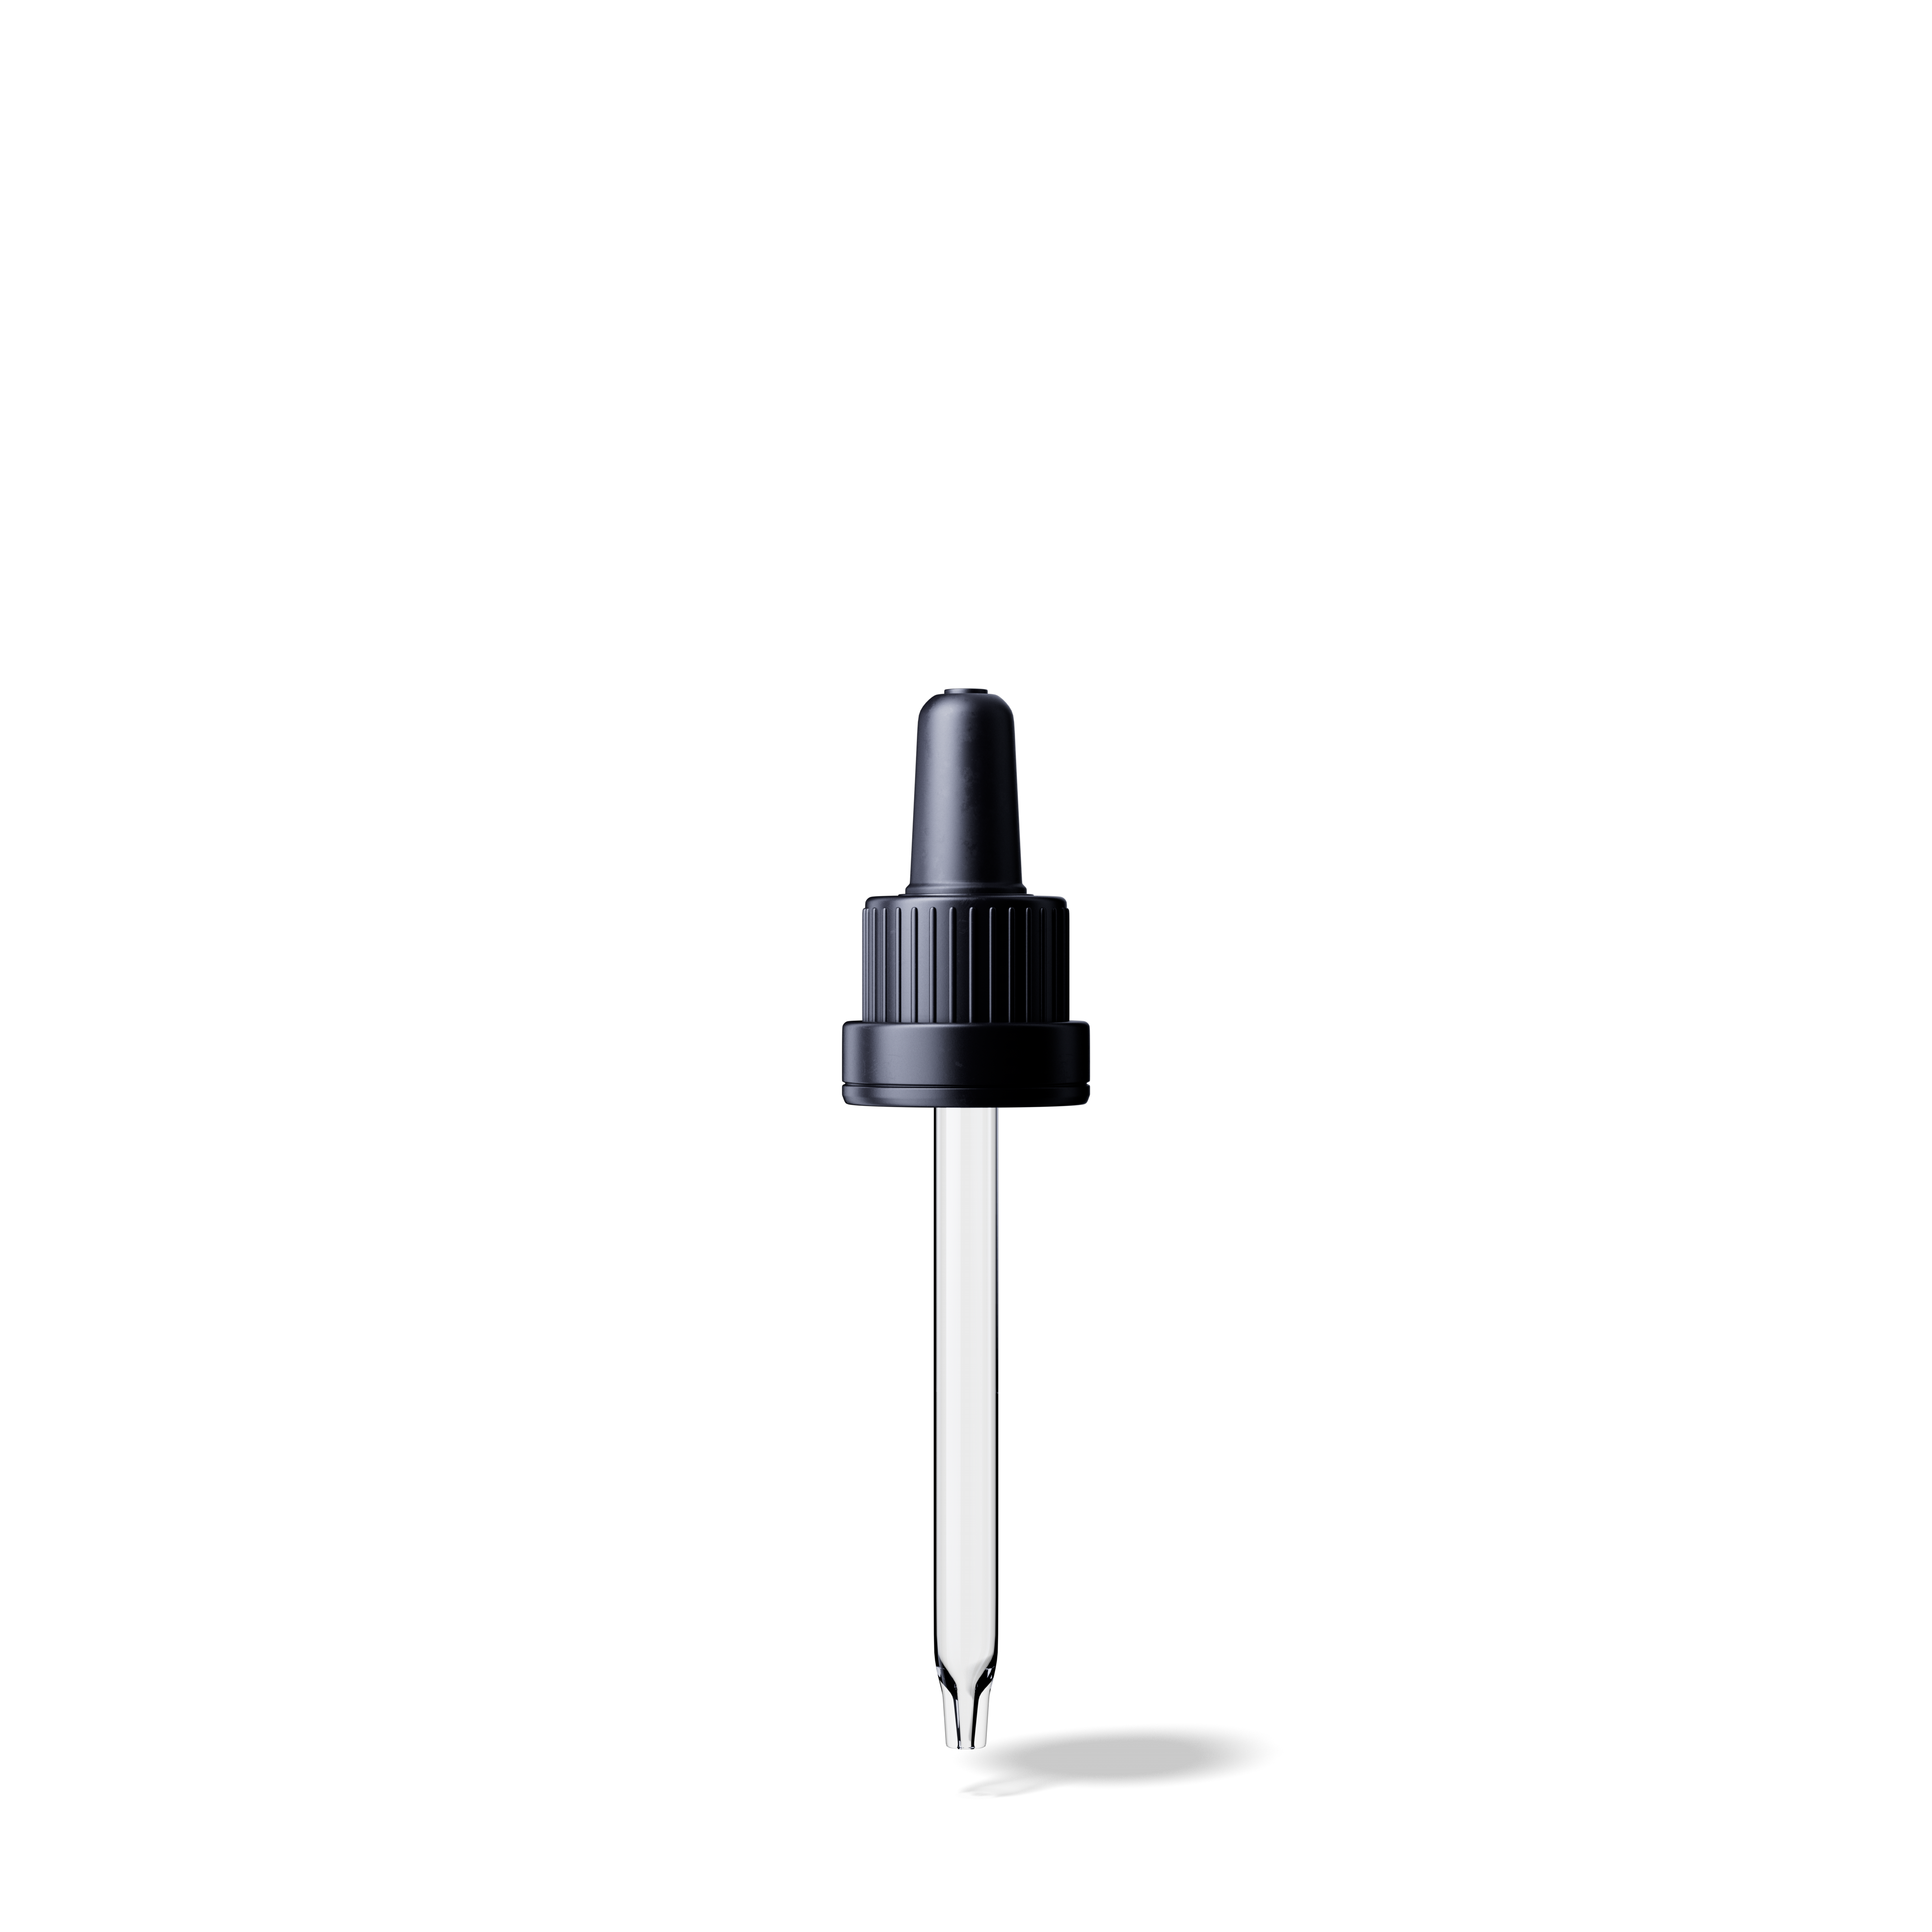 Pipette tamper evident DIN18, III, black, ribbed, bulb TPE, dose 0.7ml, conical tip (Orion 30)